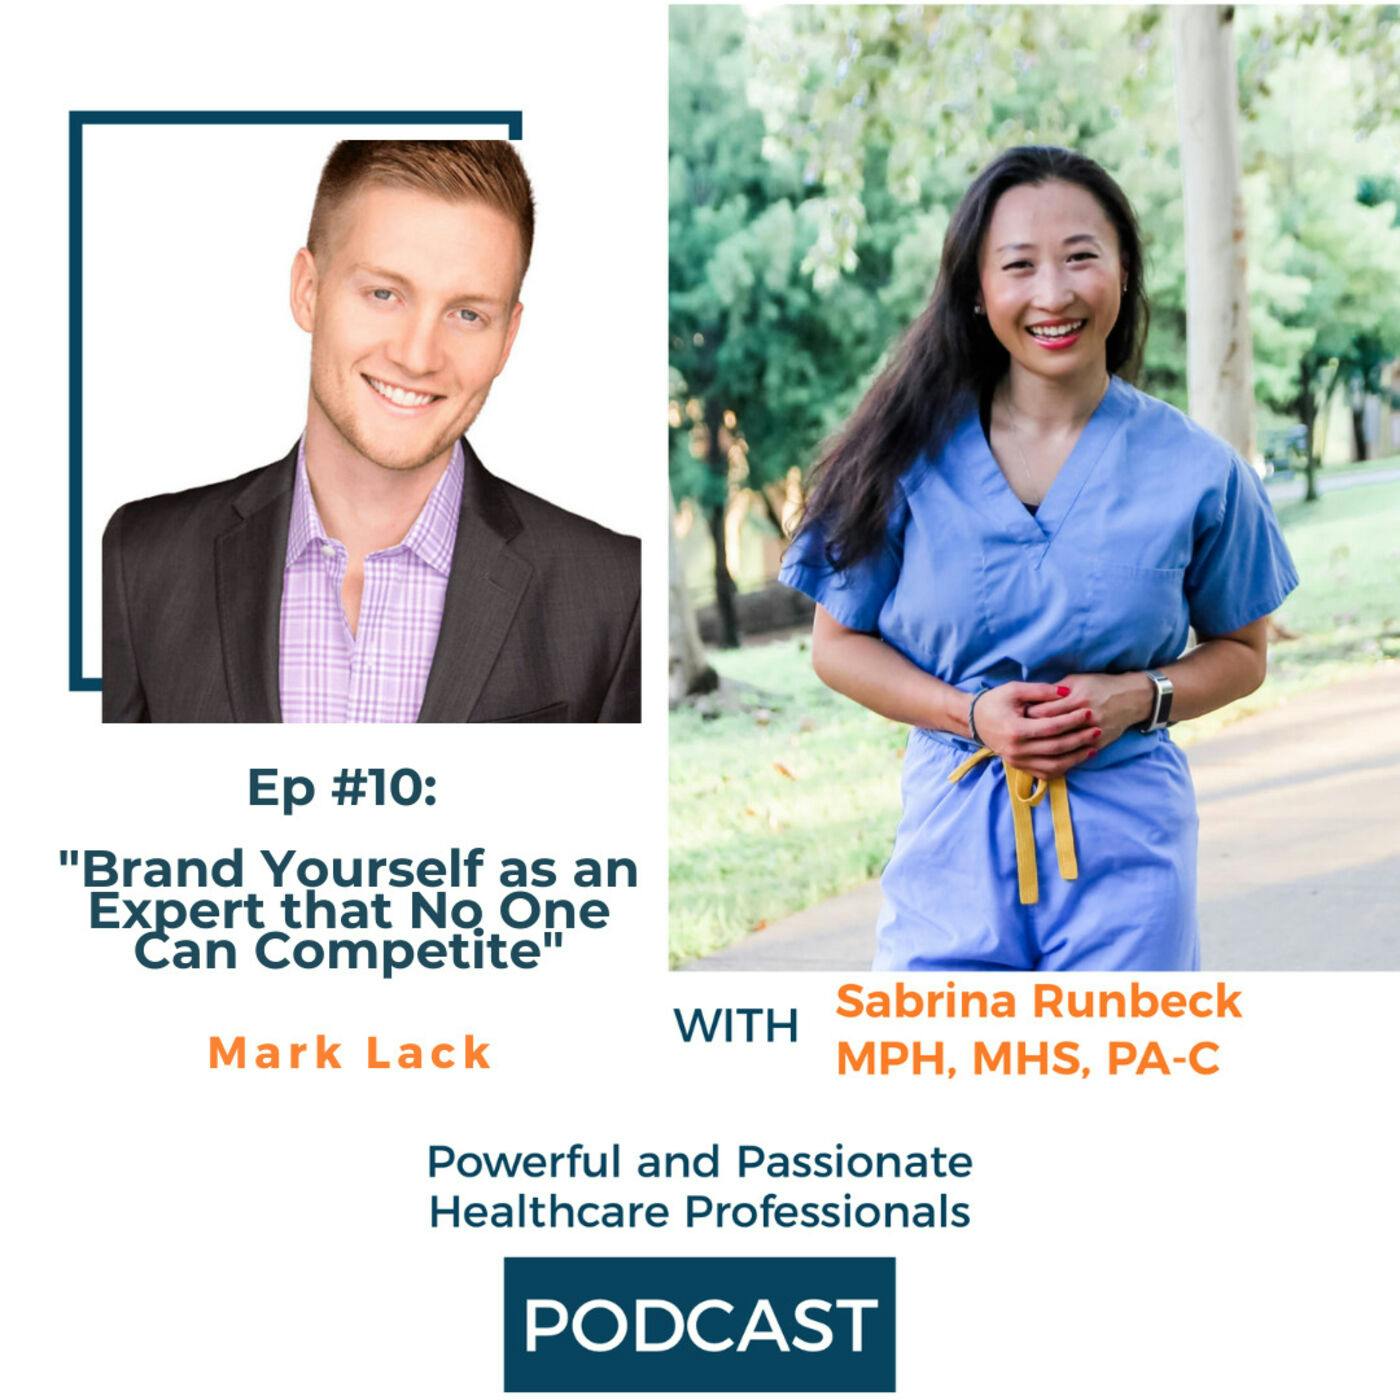 Ep 10 – Brand Yourself as an Expert that No One Can Compete with Mark Lack